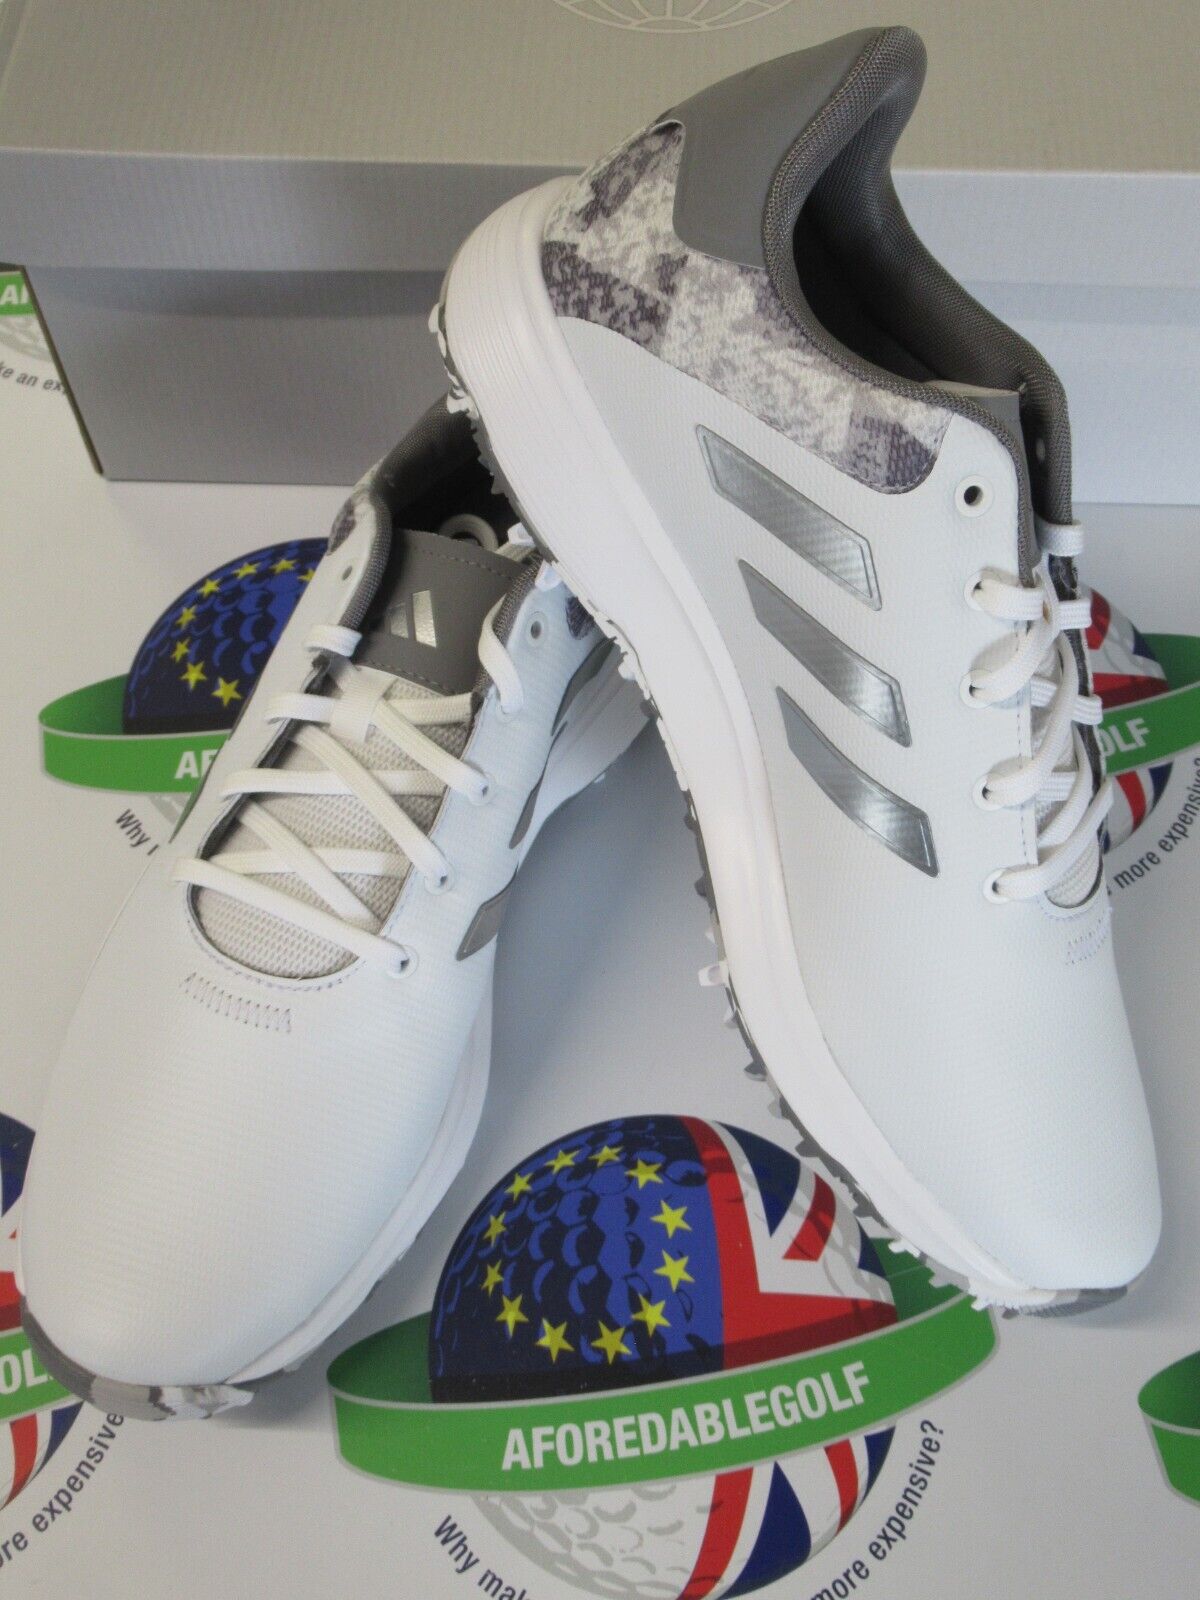 adidas s2g 23 white/silver/grey camo spiked golf shoes uk size 9.5 medium